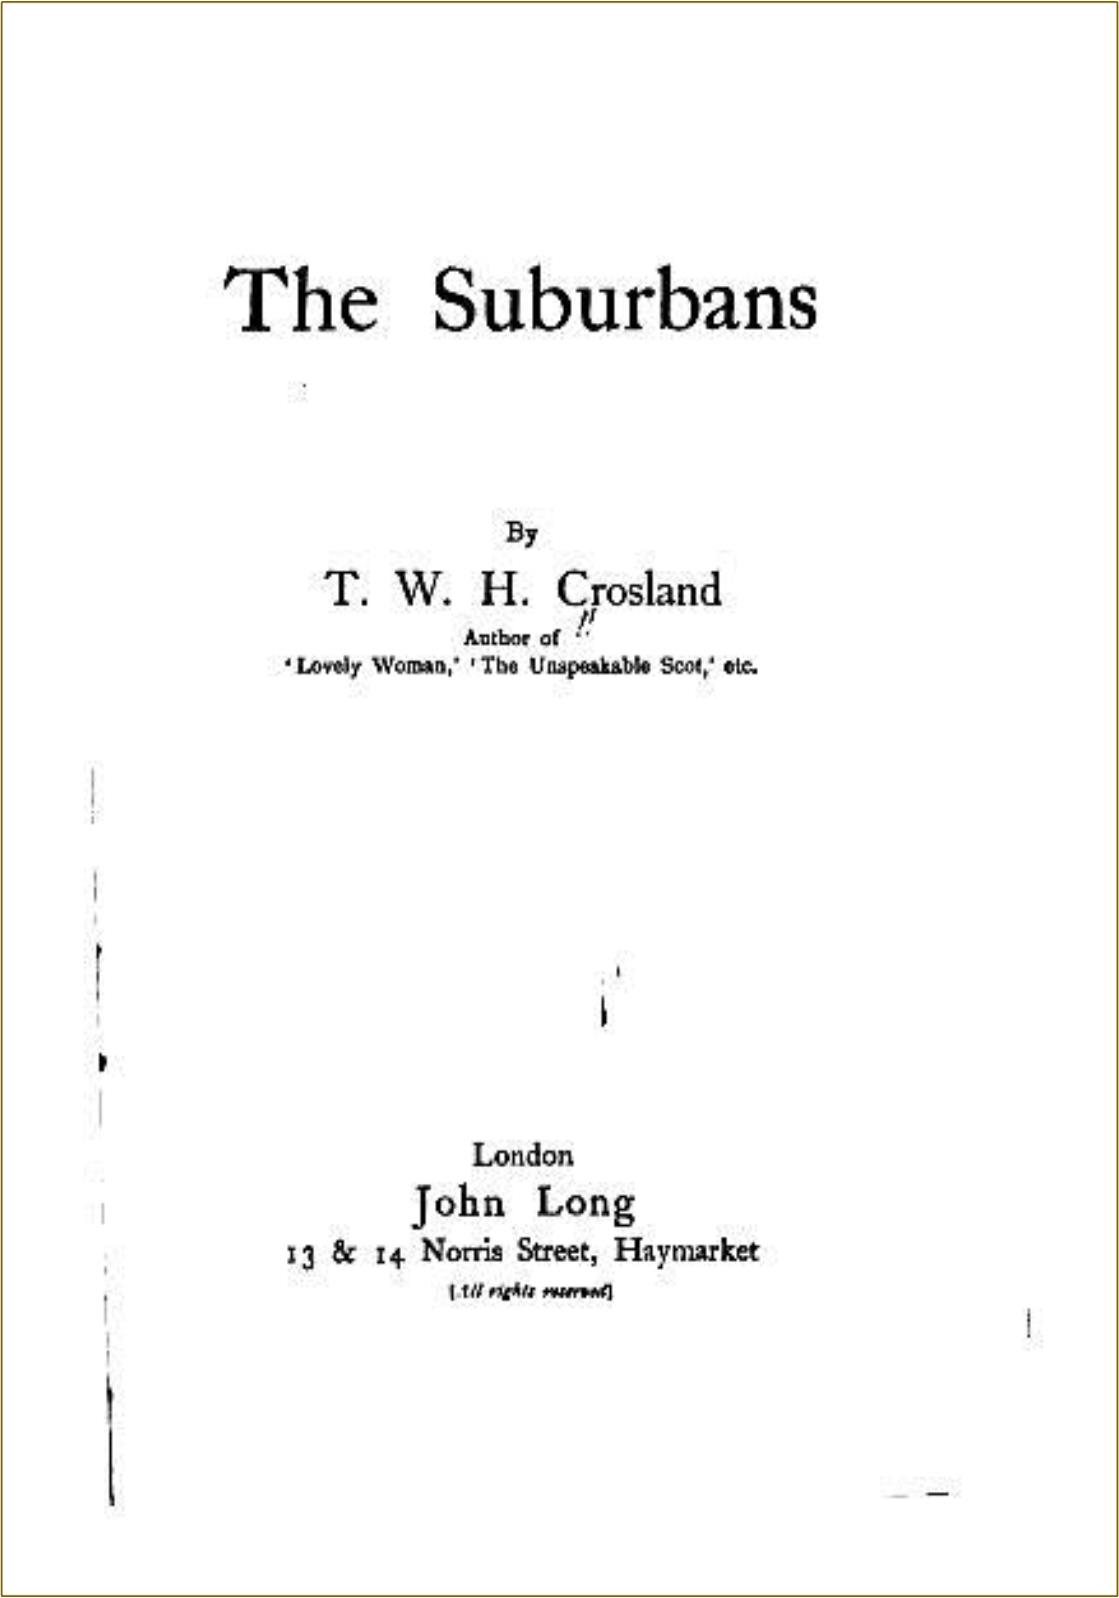 cover for The Suburbans by T.W. H. Crosland